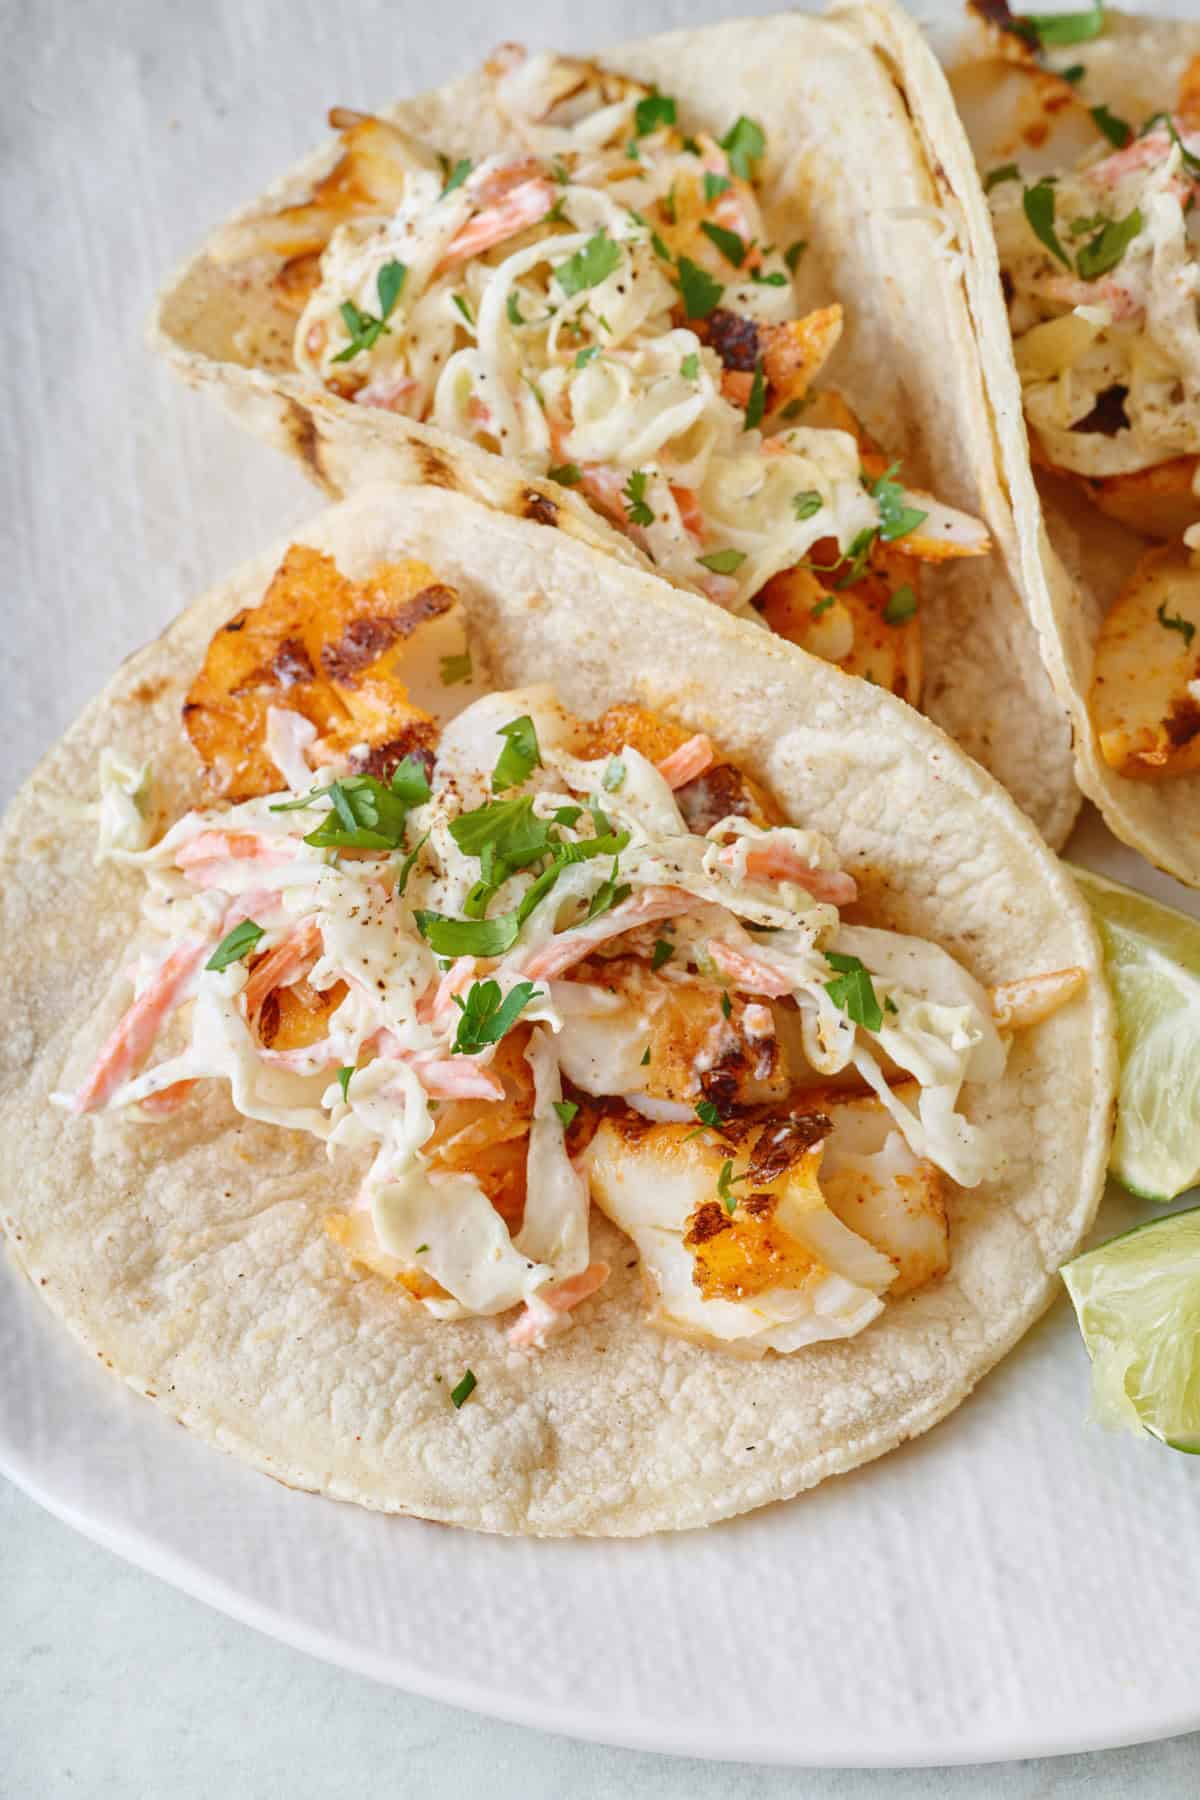 Grilled fish tacos topped with coleslaw and chopped cilantro on a plate.